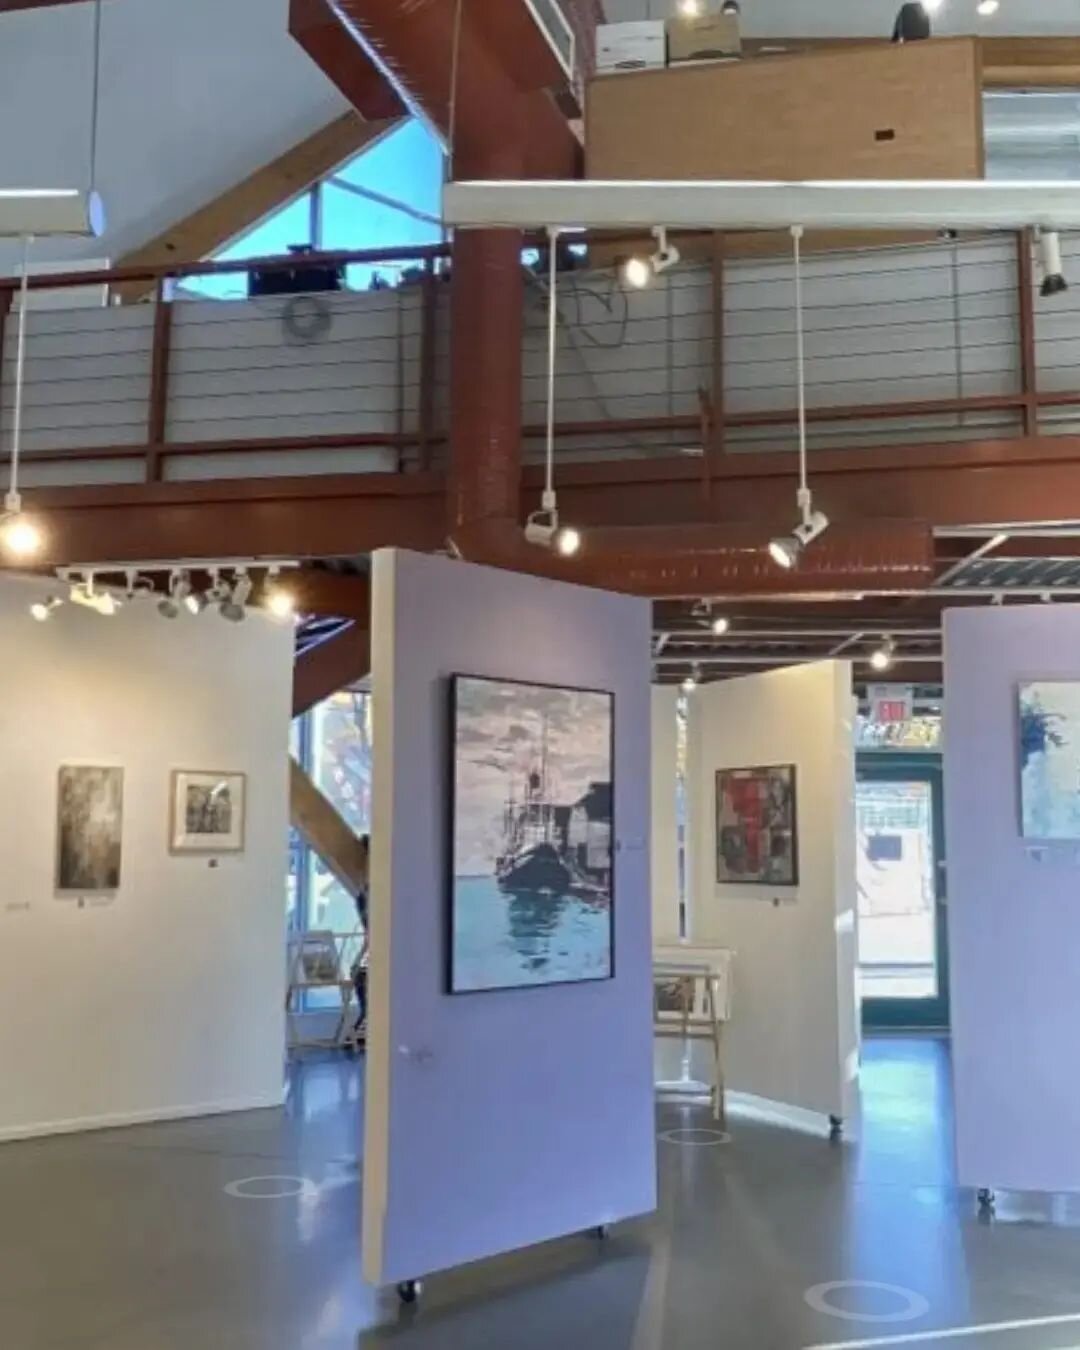 Just did a virtual tour of the Federation of Canadian Artist's new exhibition, Mixed 2022. Posting some screenshots of my virtual tour, my painting Cobblestone Alley is in the last shot. So wish I could see this exhibition in person as love seeing mi